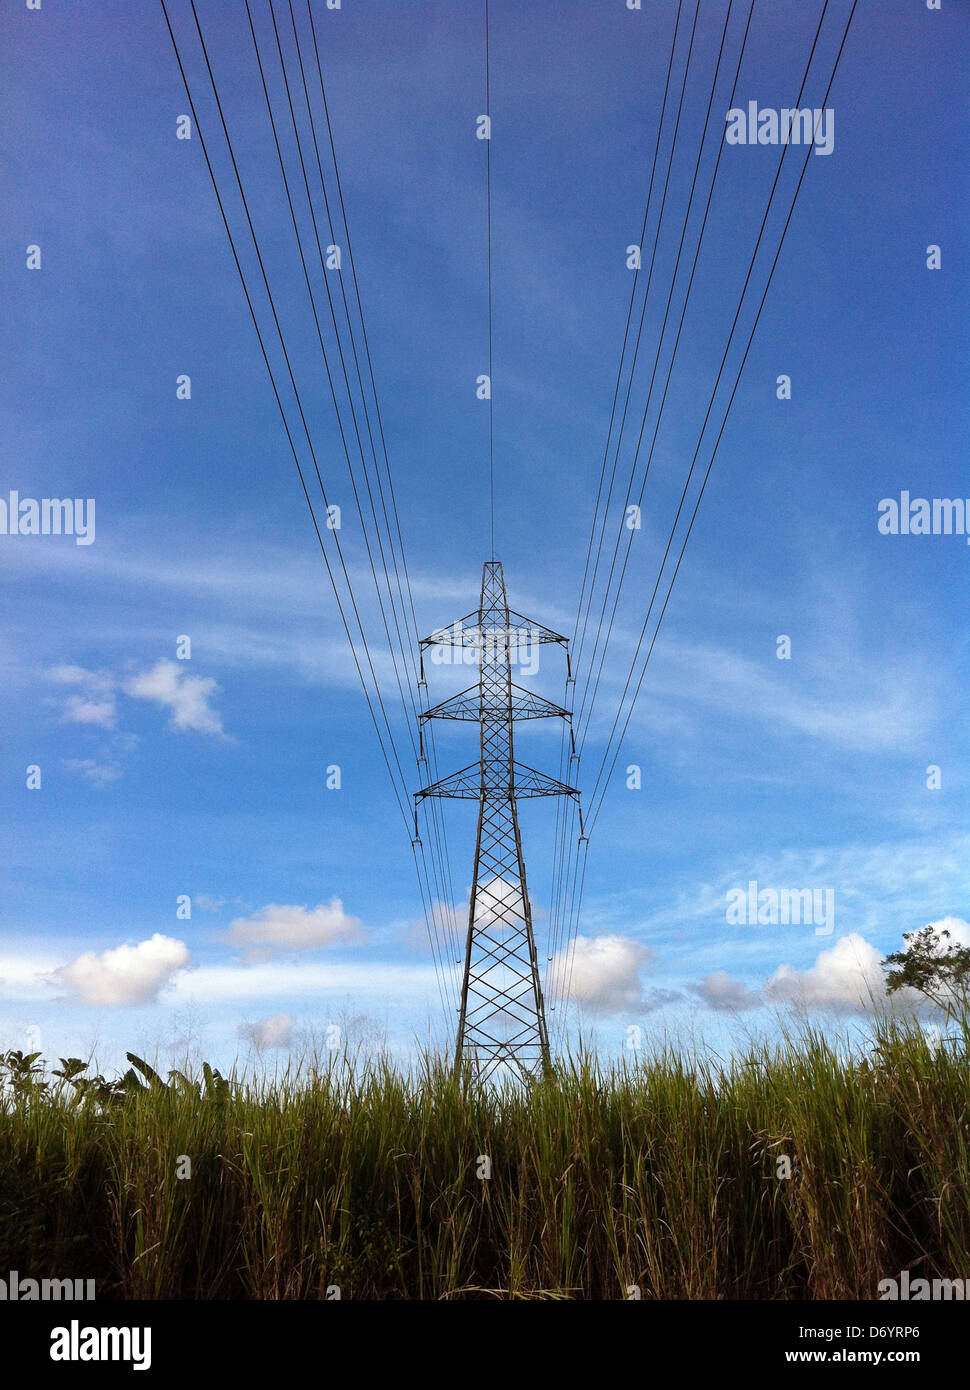 Power line over tall grass in rural landscape Stock Photo